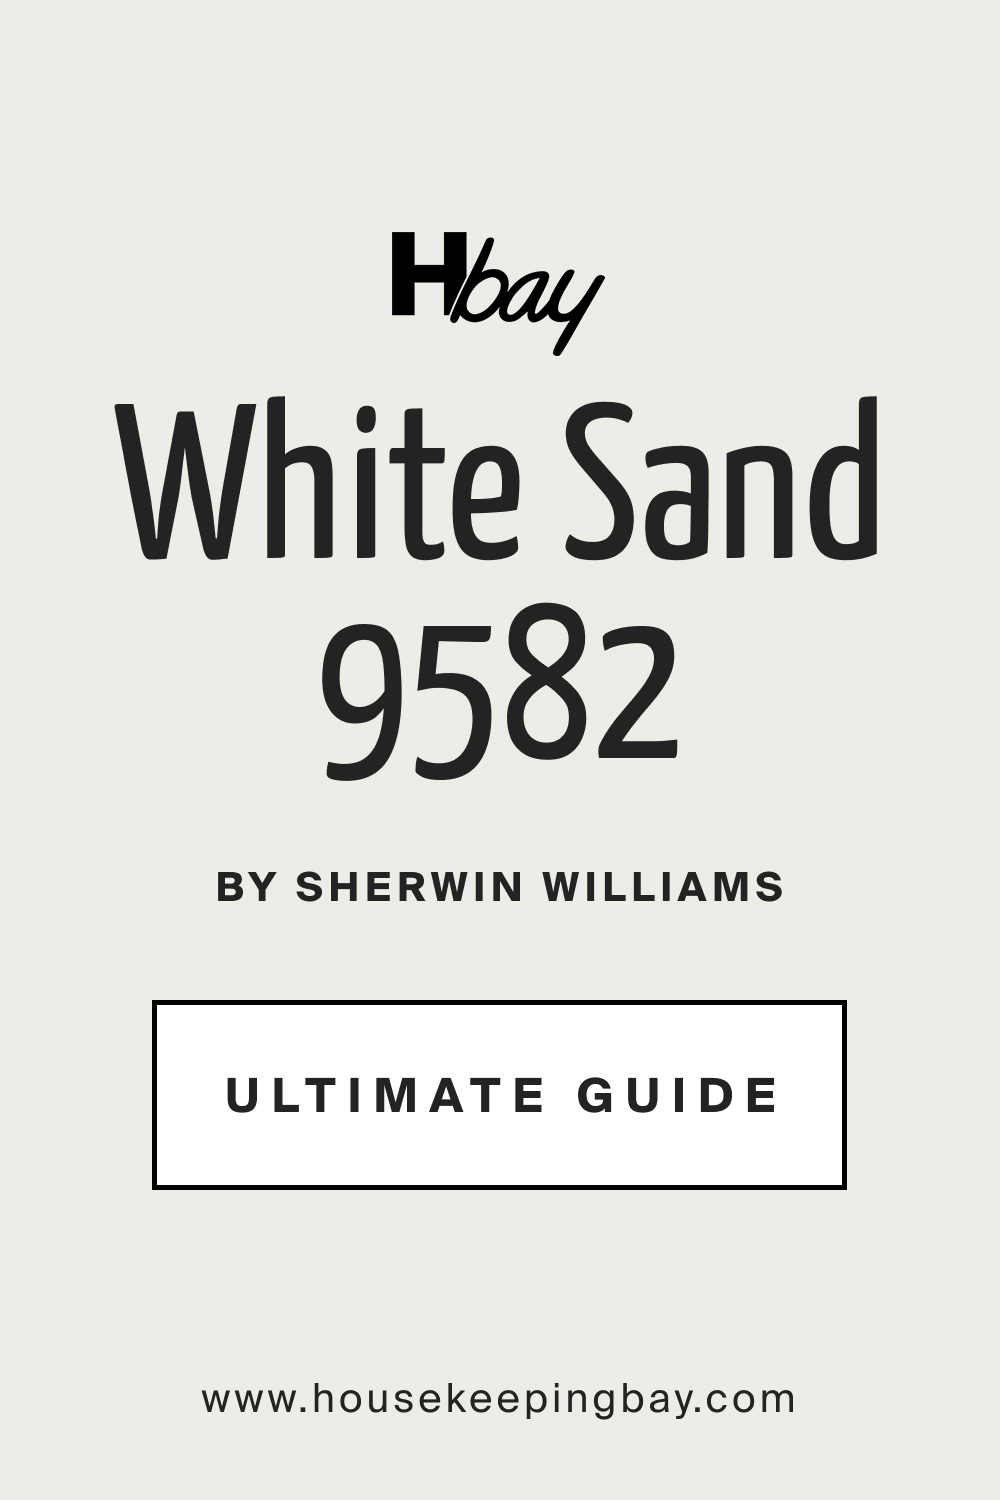 White Sand SW 9582by Sherwin Williams Ultimate Guide